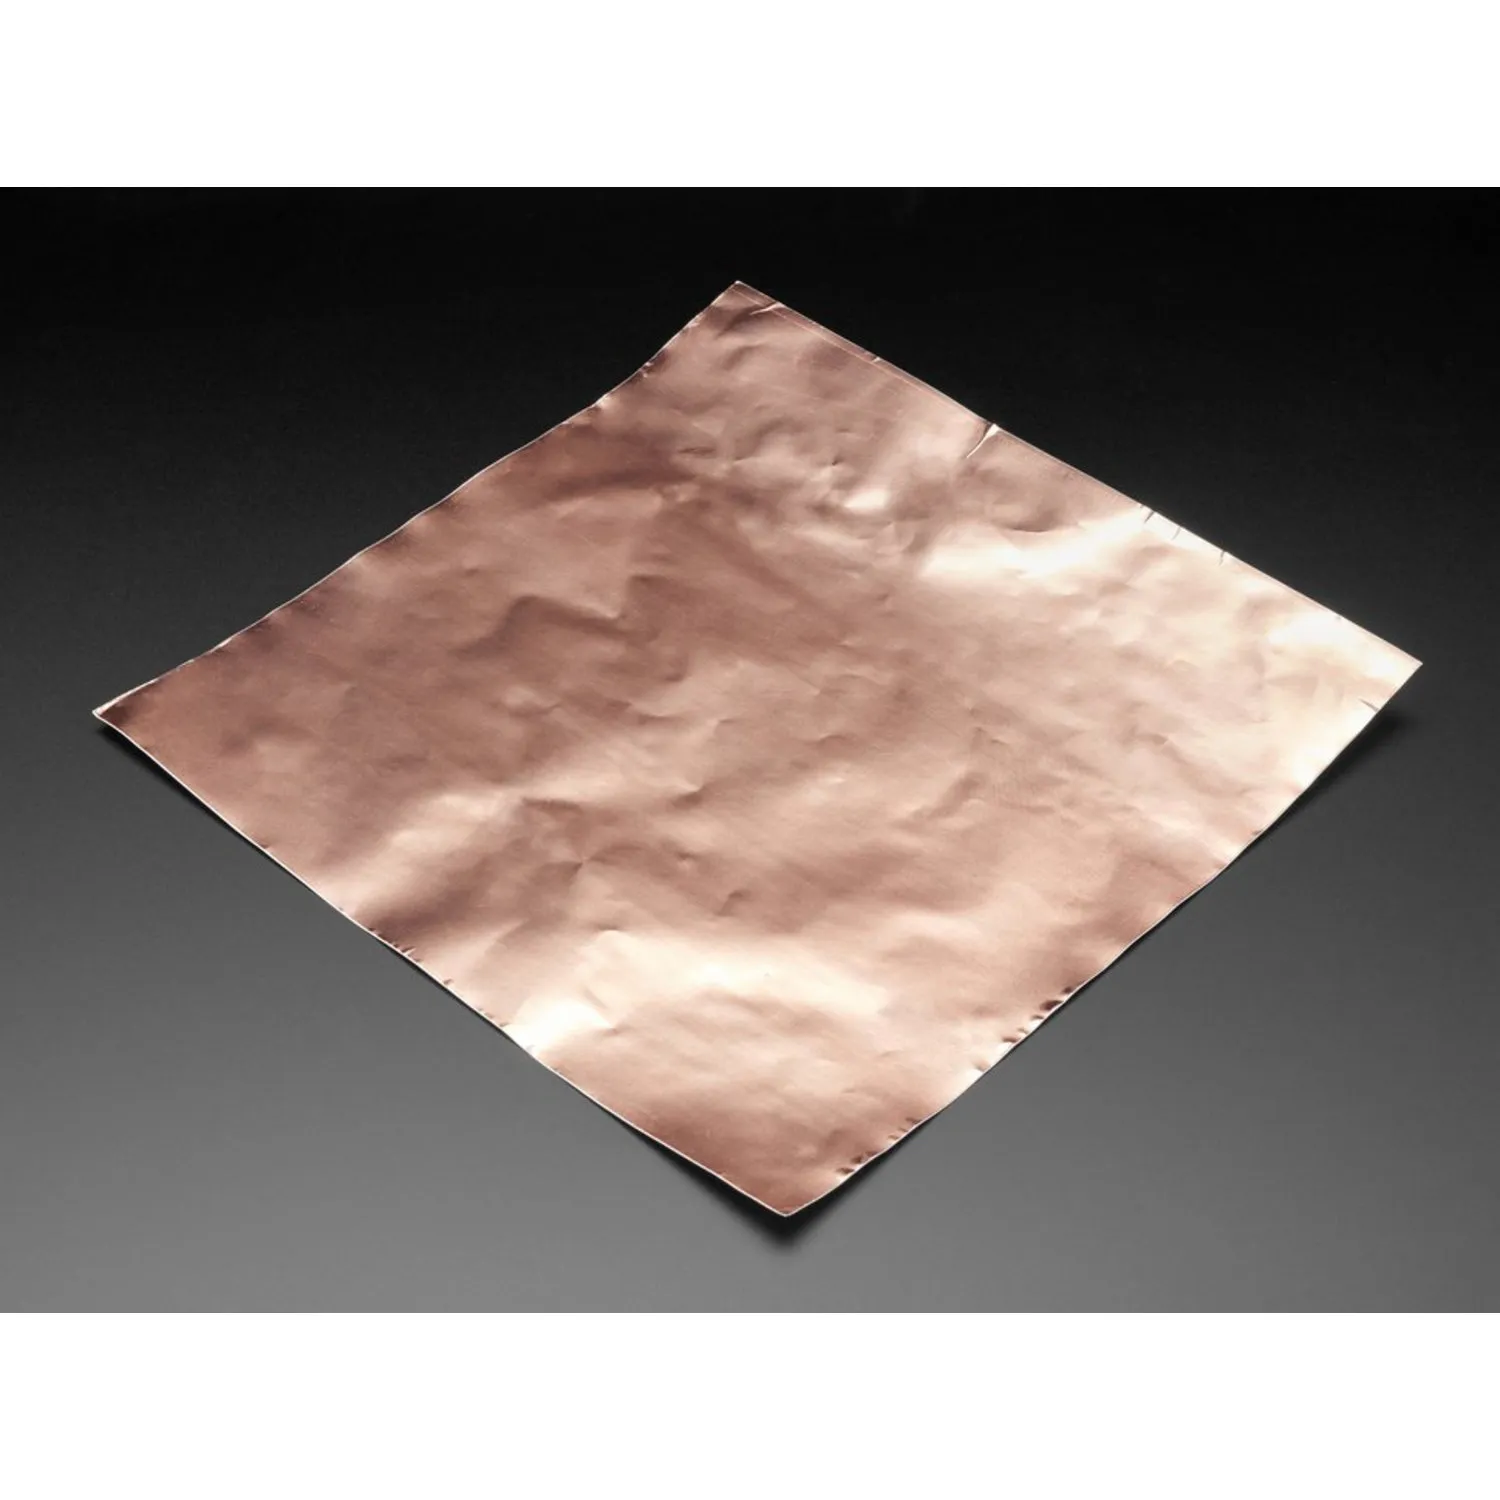 Photo of Copper Foil Sheet with Conductive Adhesive - 12 x12 Sheet